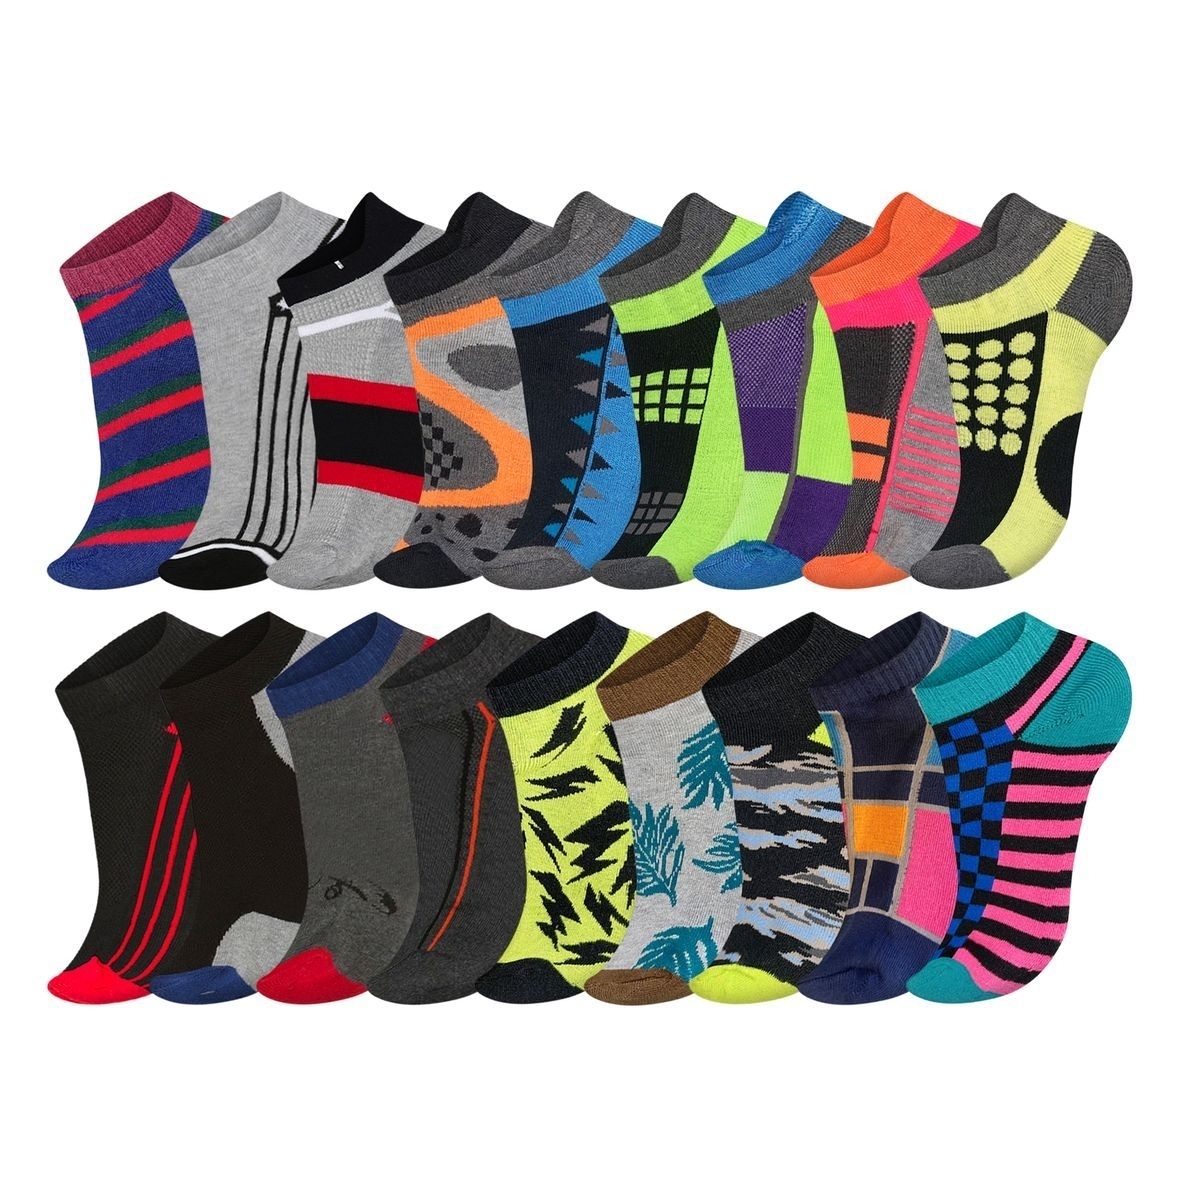 30-Pairs: Men's Moisture Wicking Mesh Performance Ankle Low Cut Cushion Athletic Sole Socks